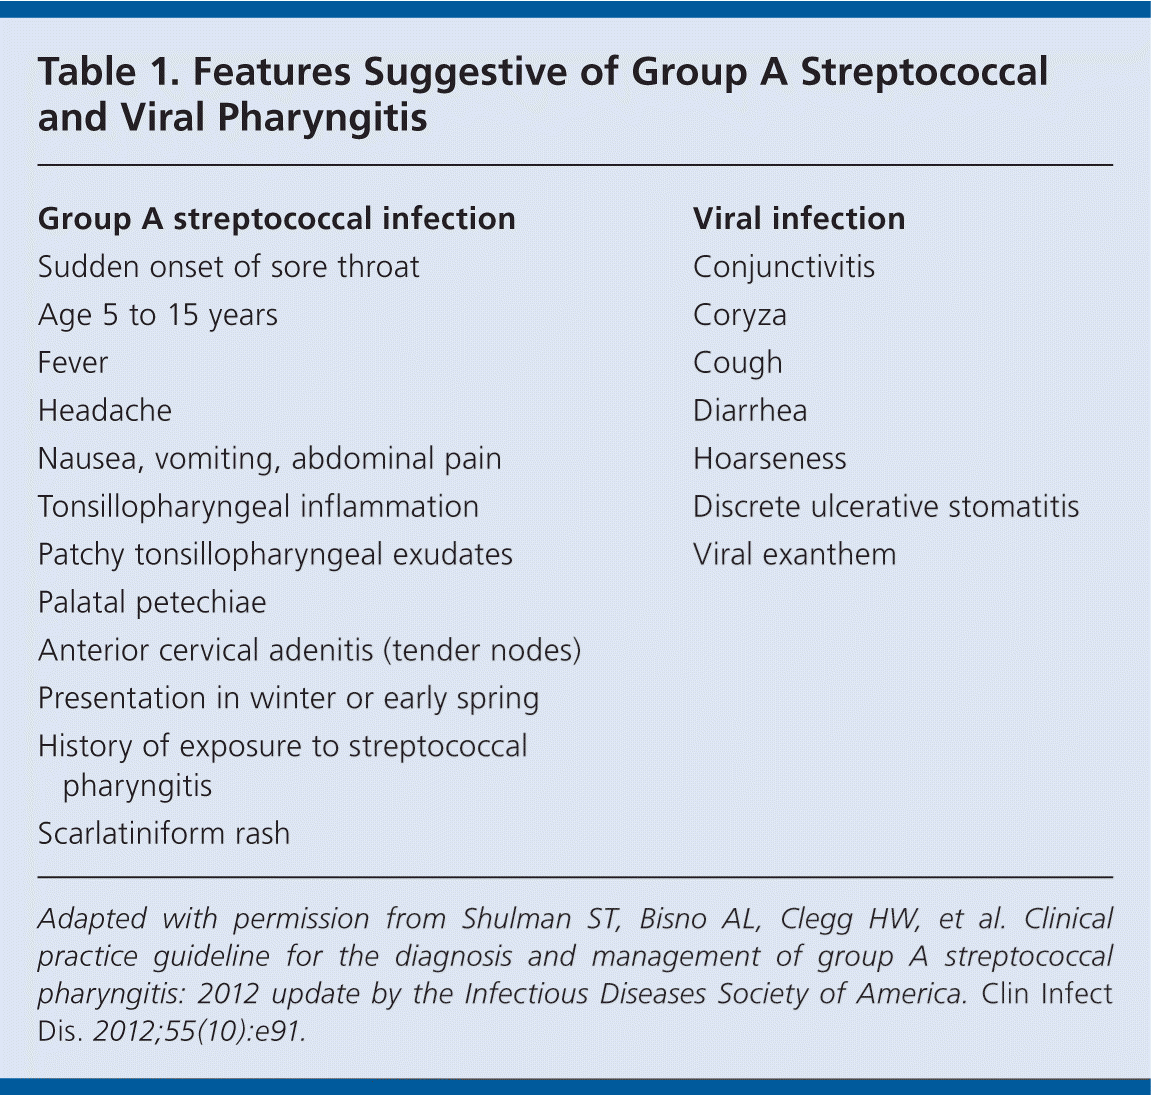 Idsa Updates Guideline For Managing Group A Streptococcal Pharyngitis